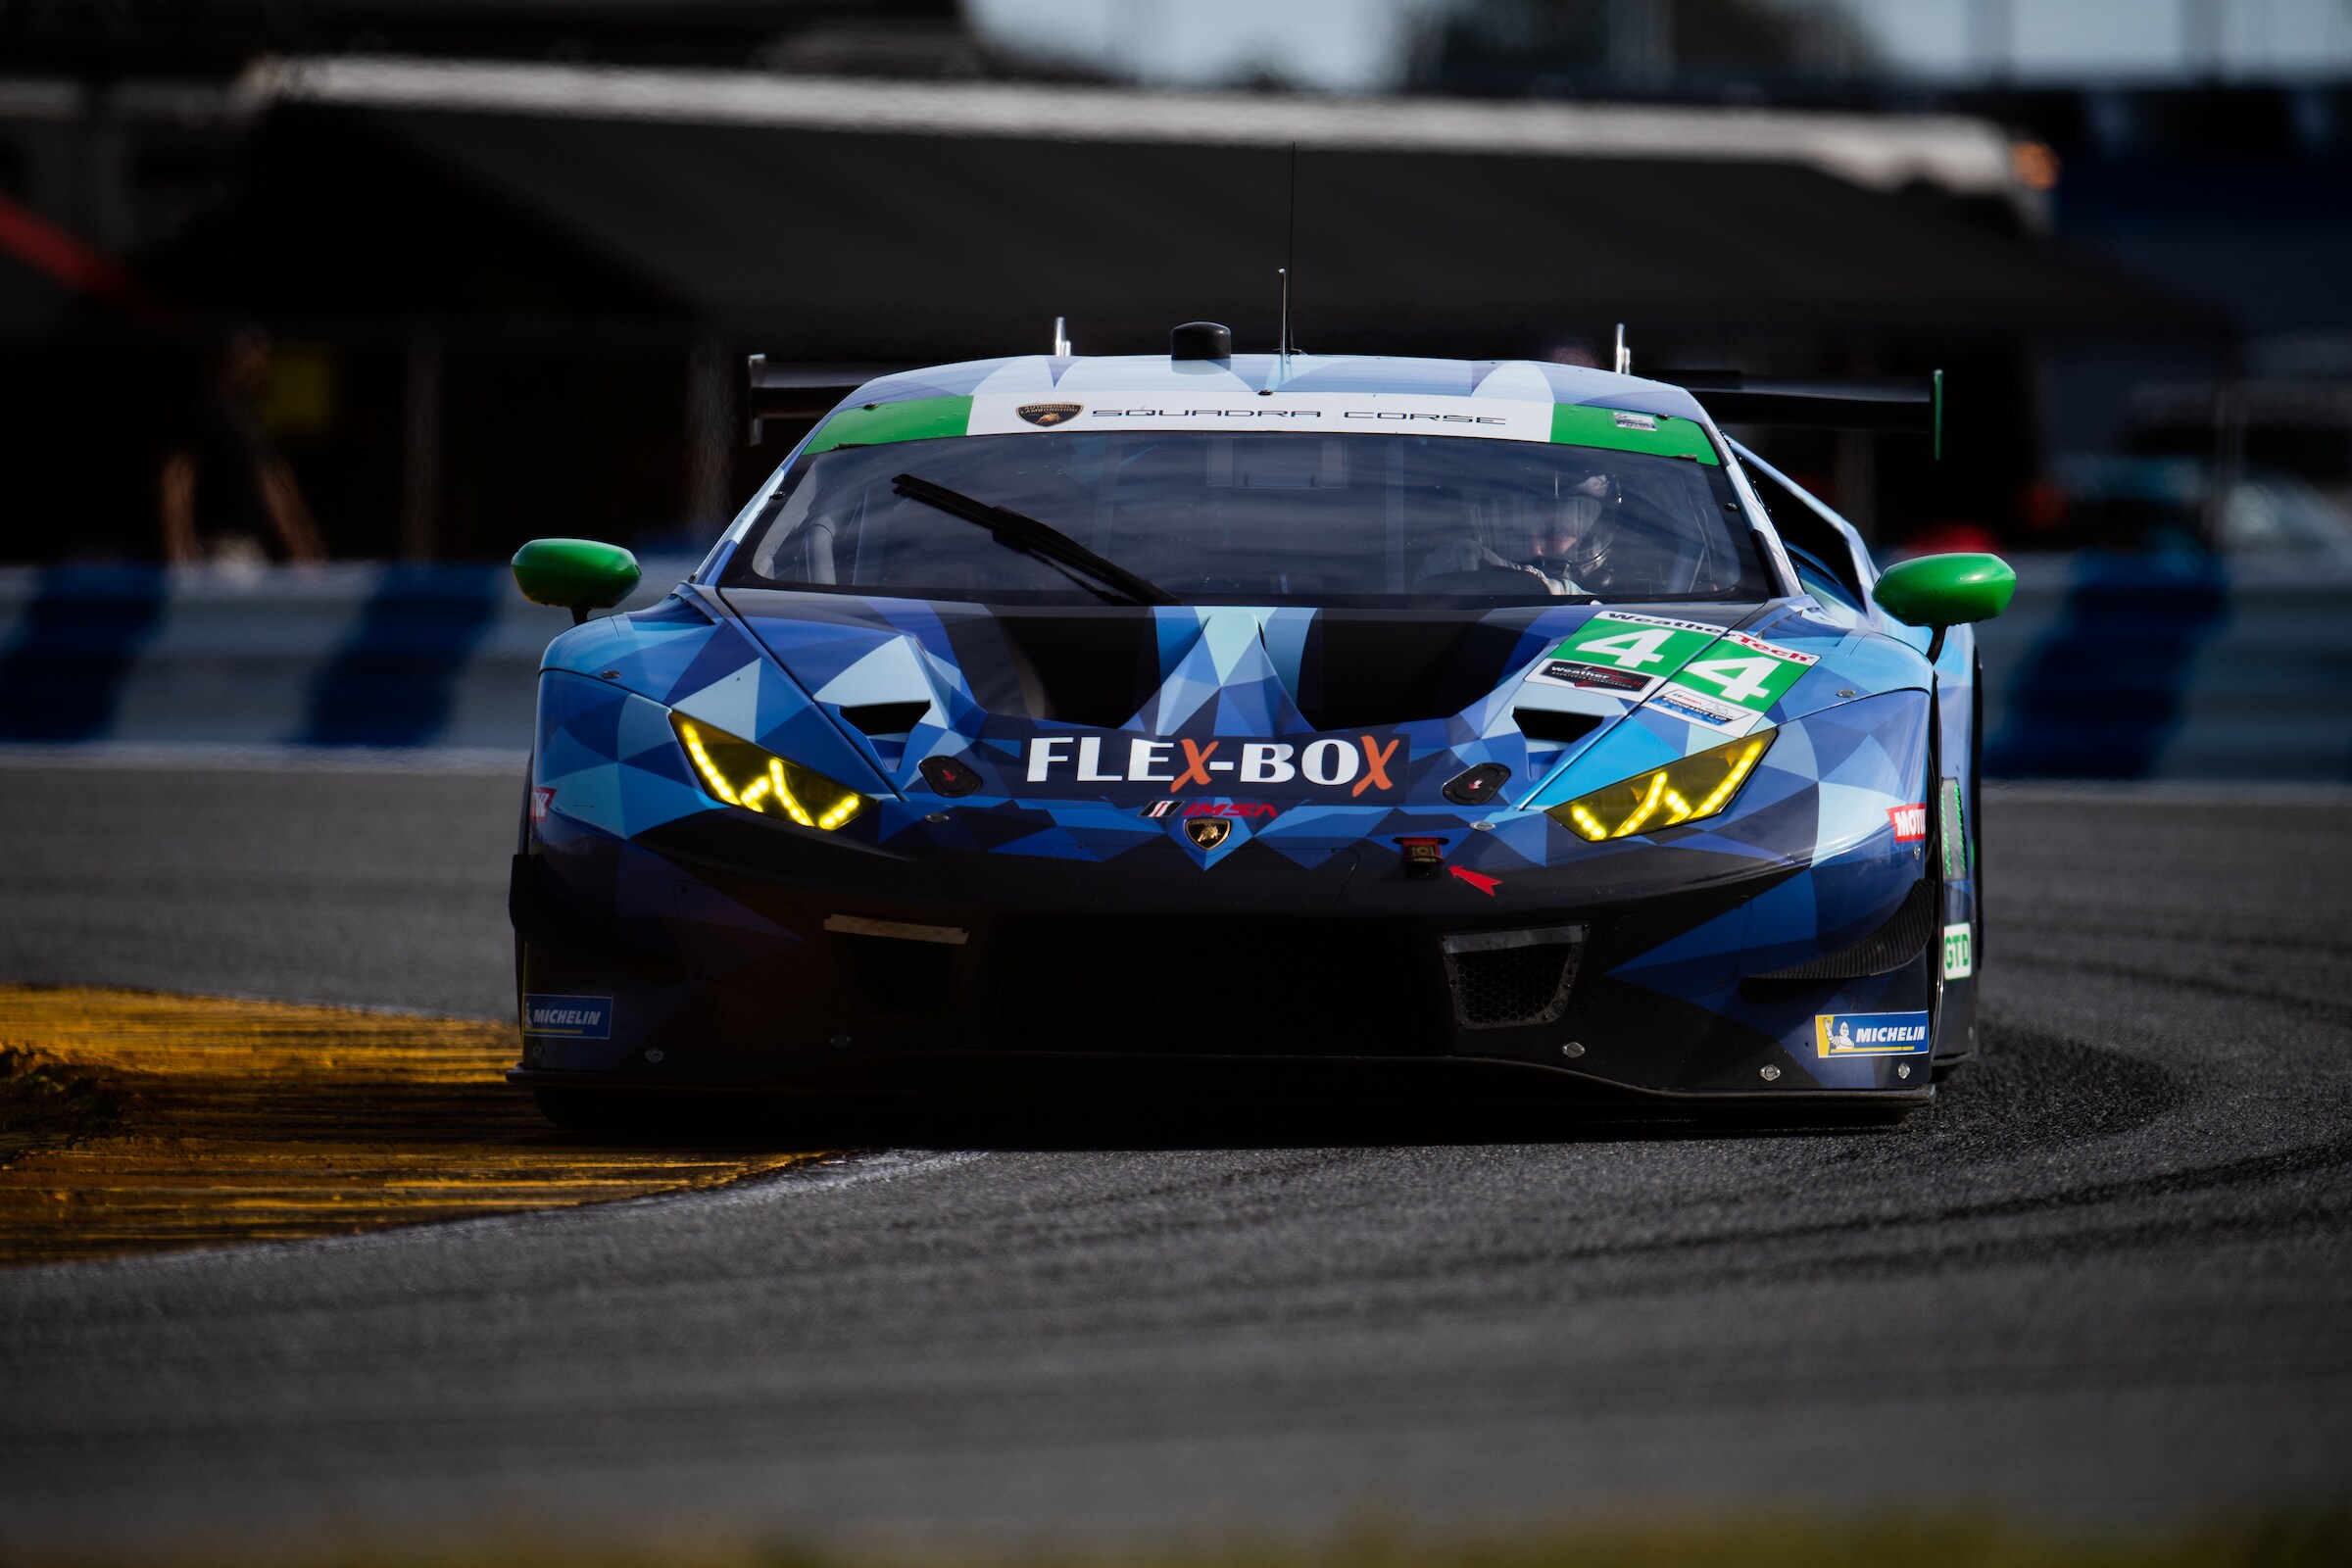 Lamborghini wins 24 Hours of Daytona for third year in a row